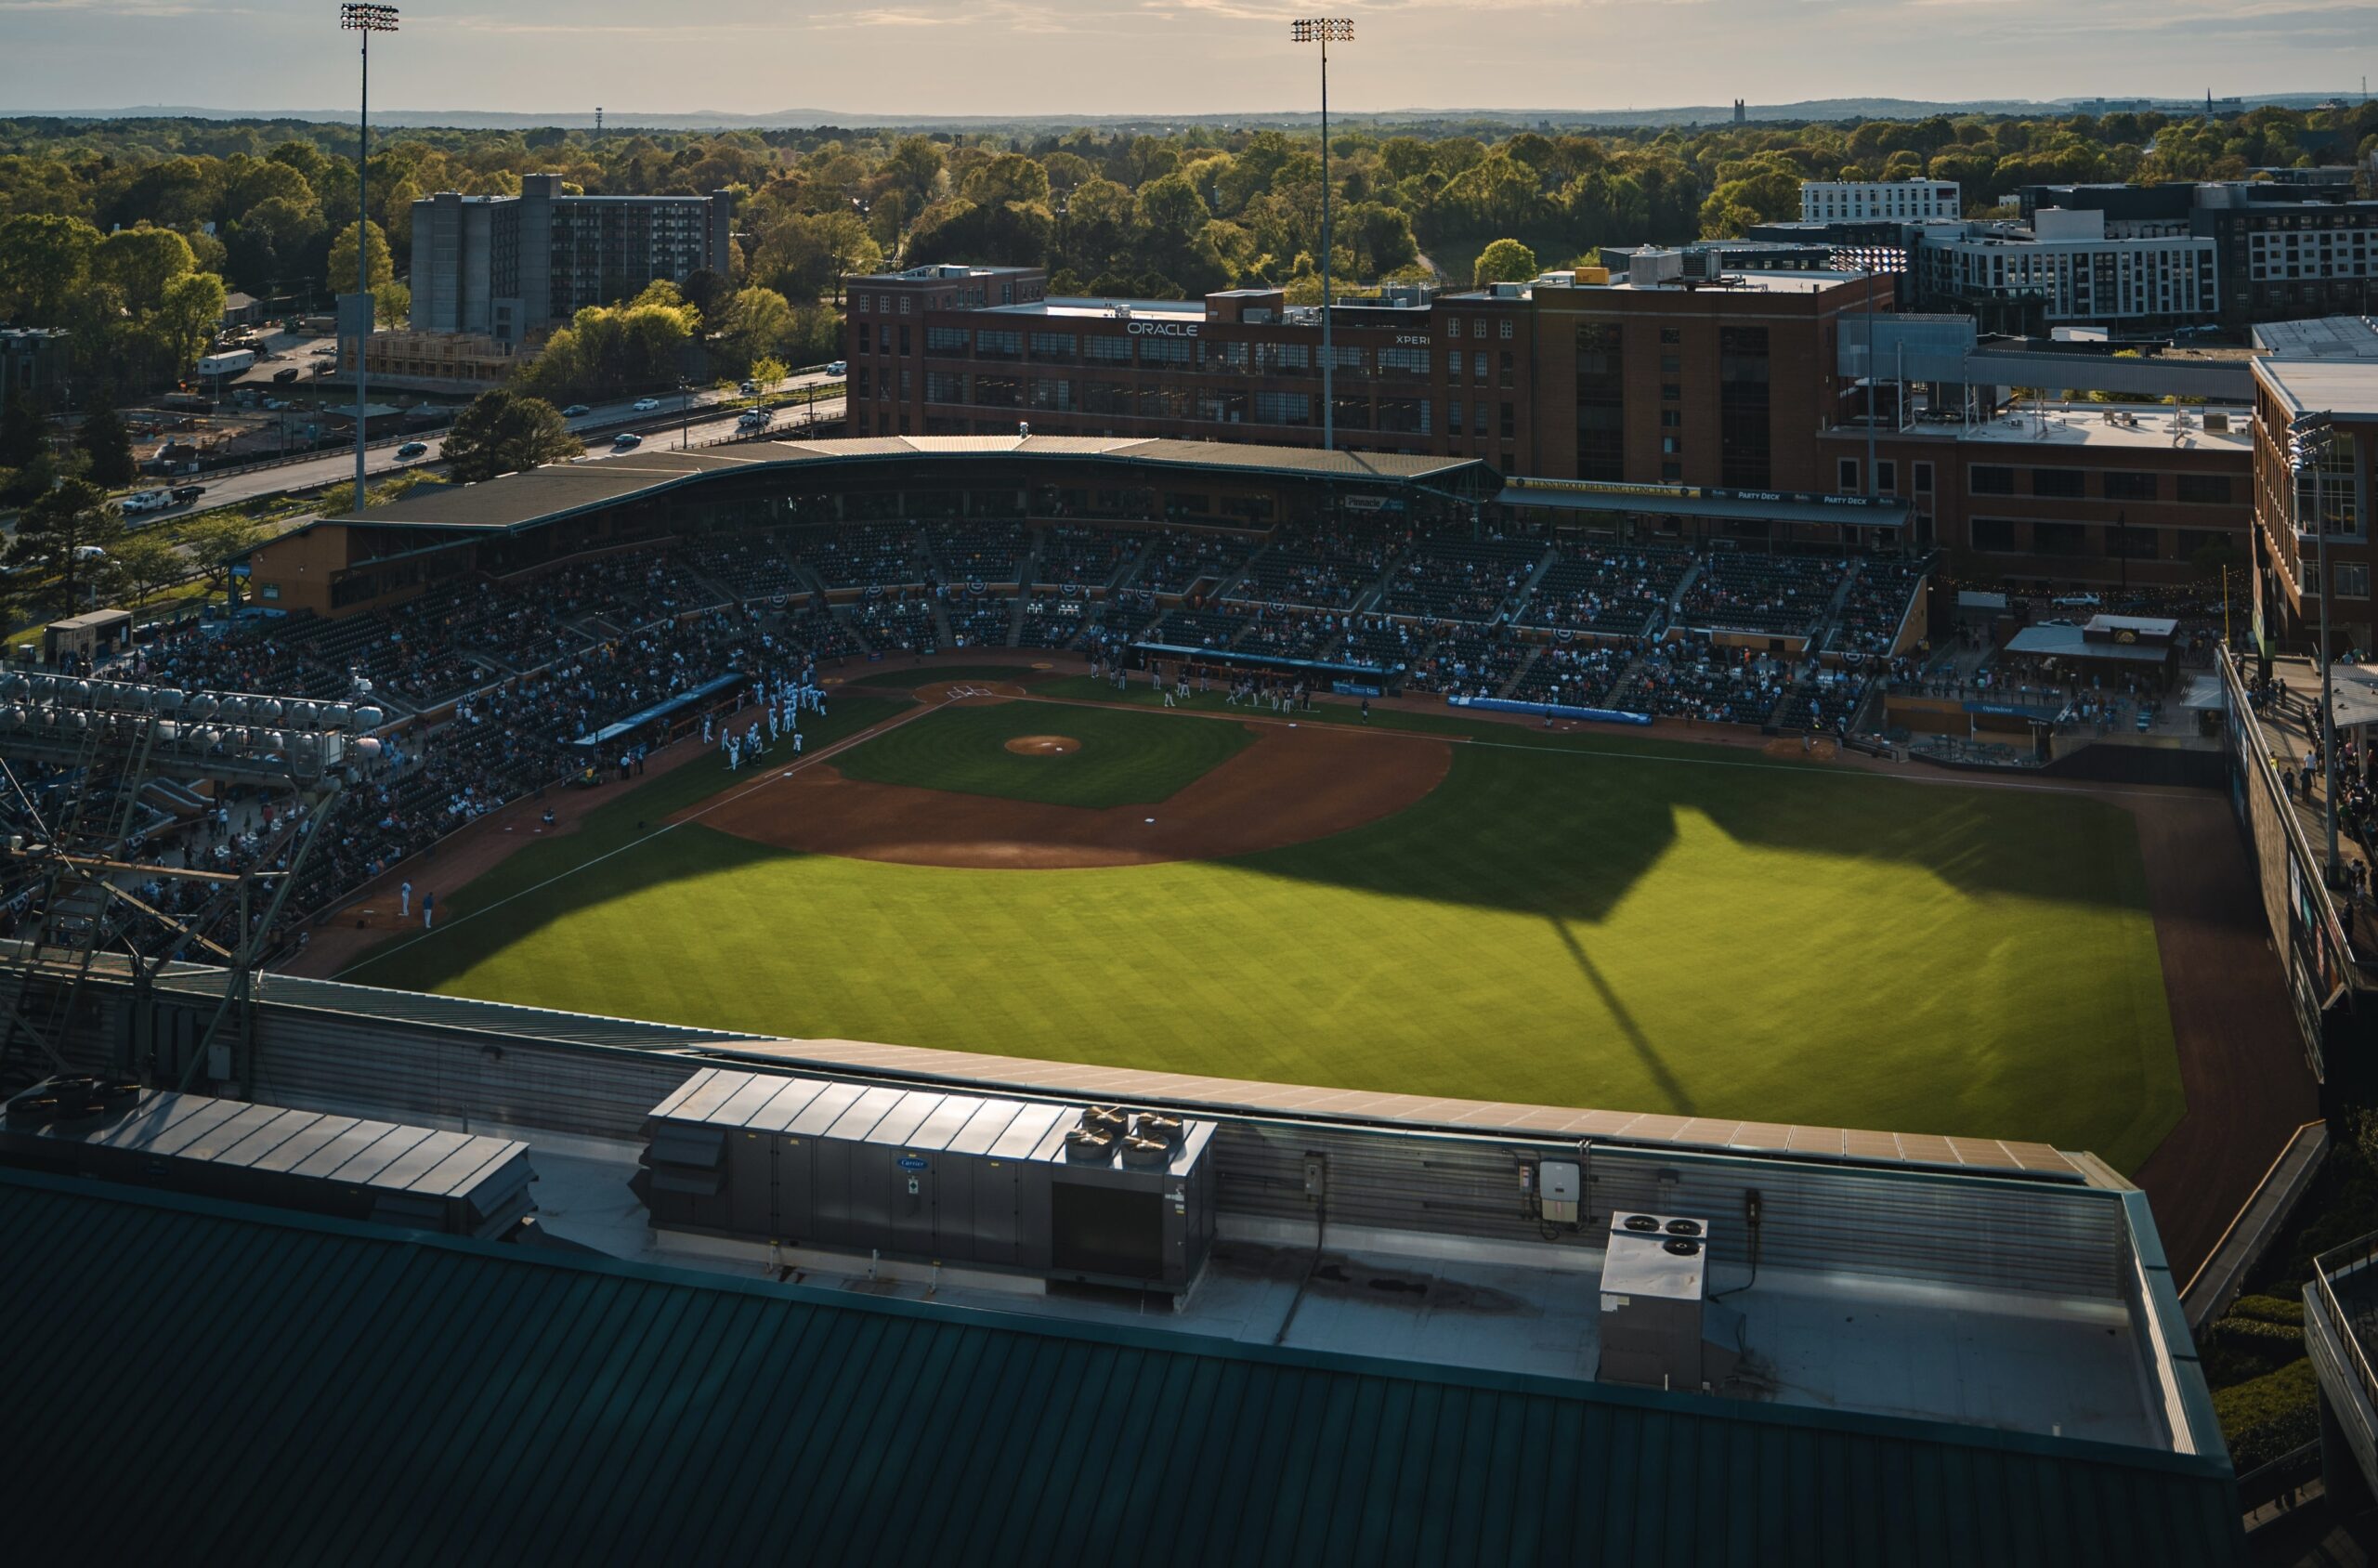 There is a lively sports culture in Greensboro, North Carolina. Learn about the popular sports venues in the charming city. 
Pictured: A North Carolina baseball field on a sunny day with overcast shadows and full seats 